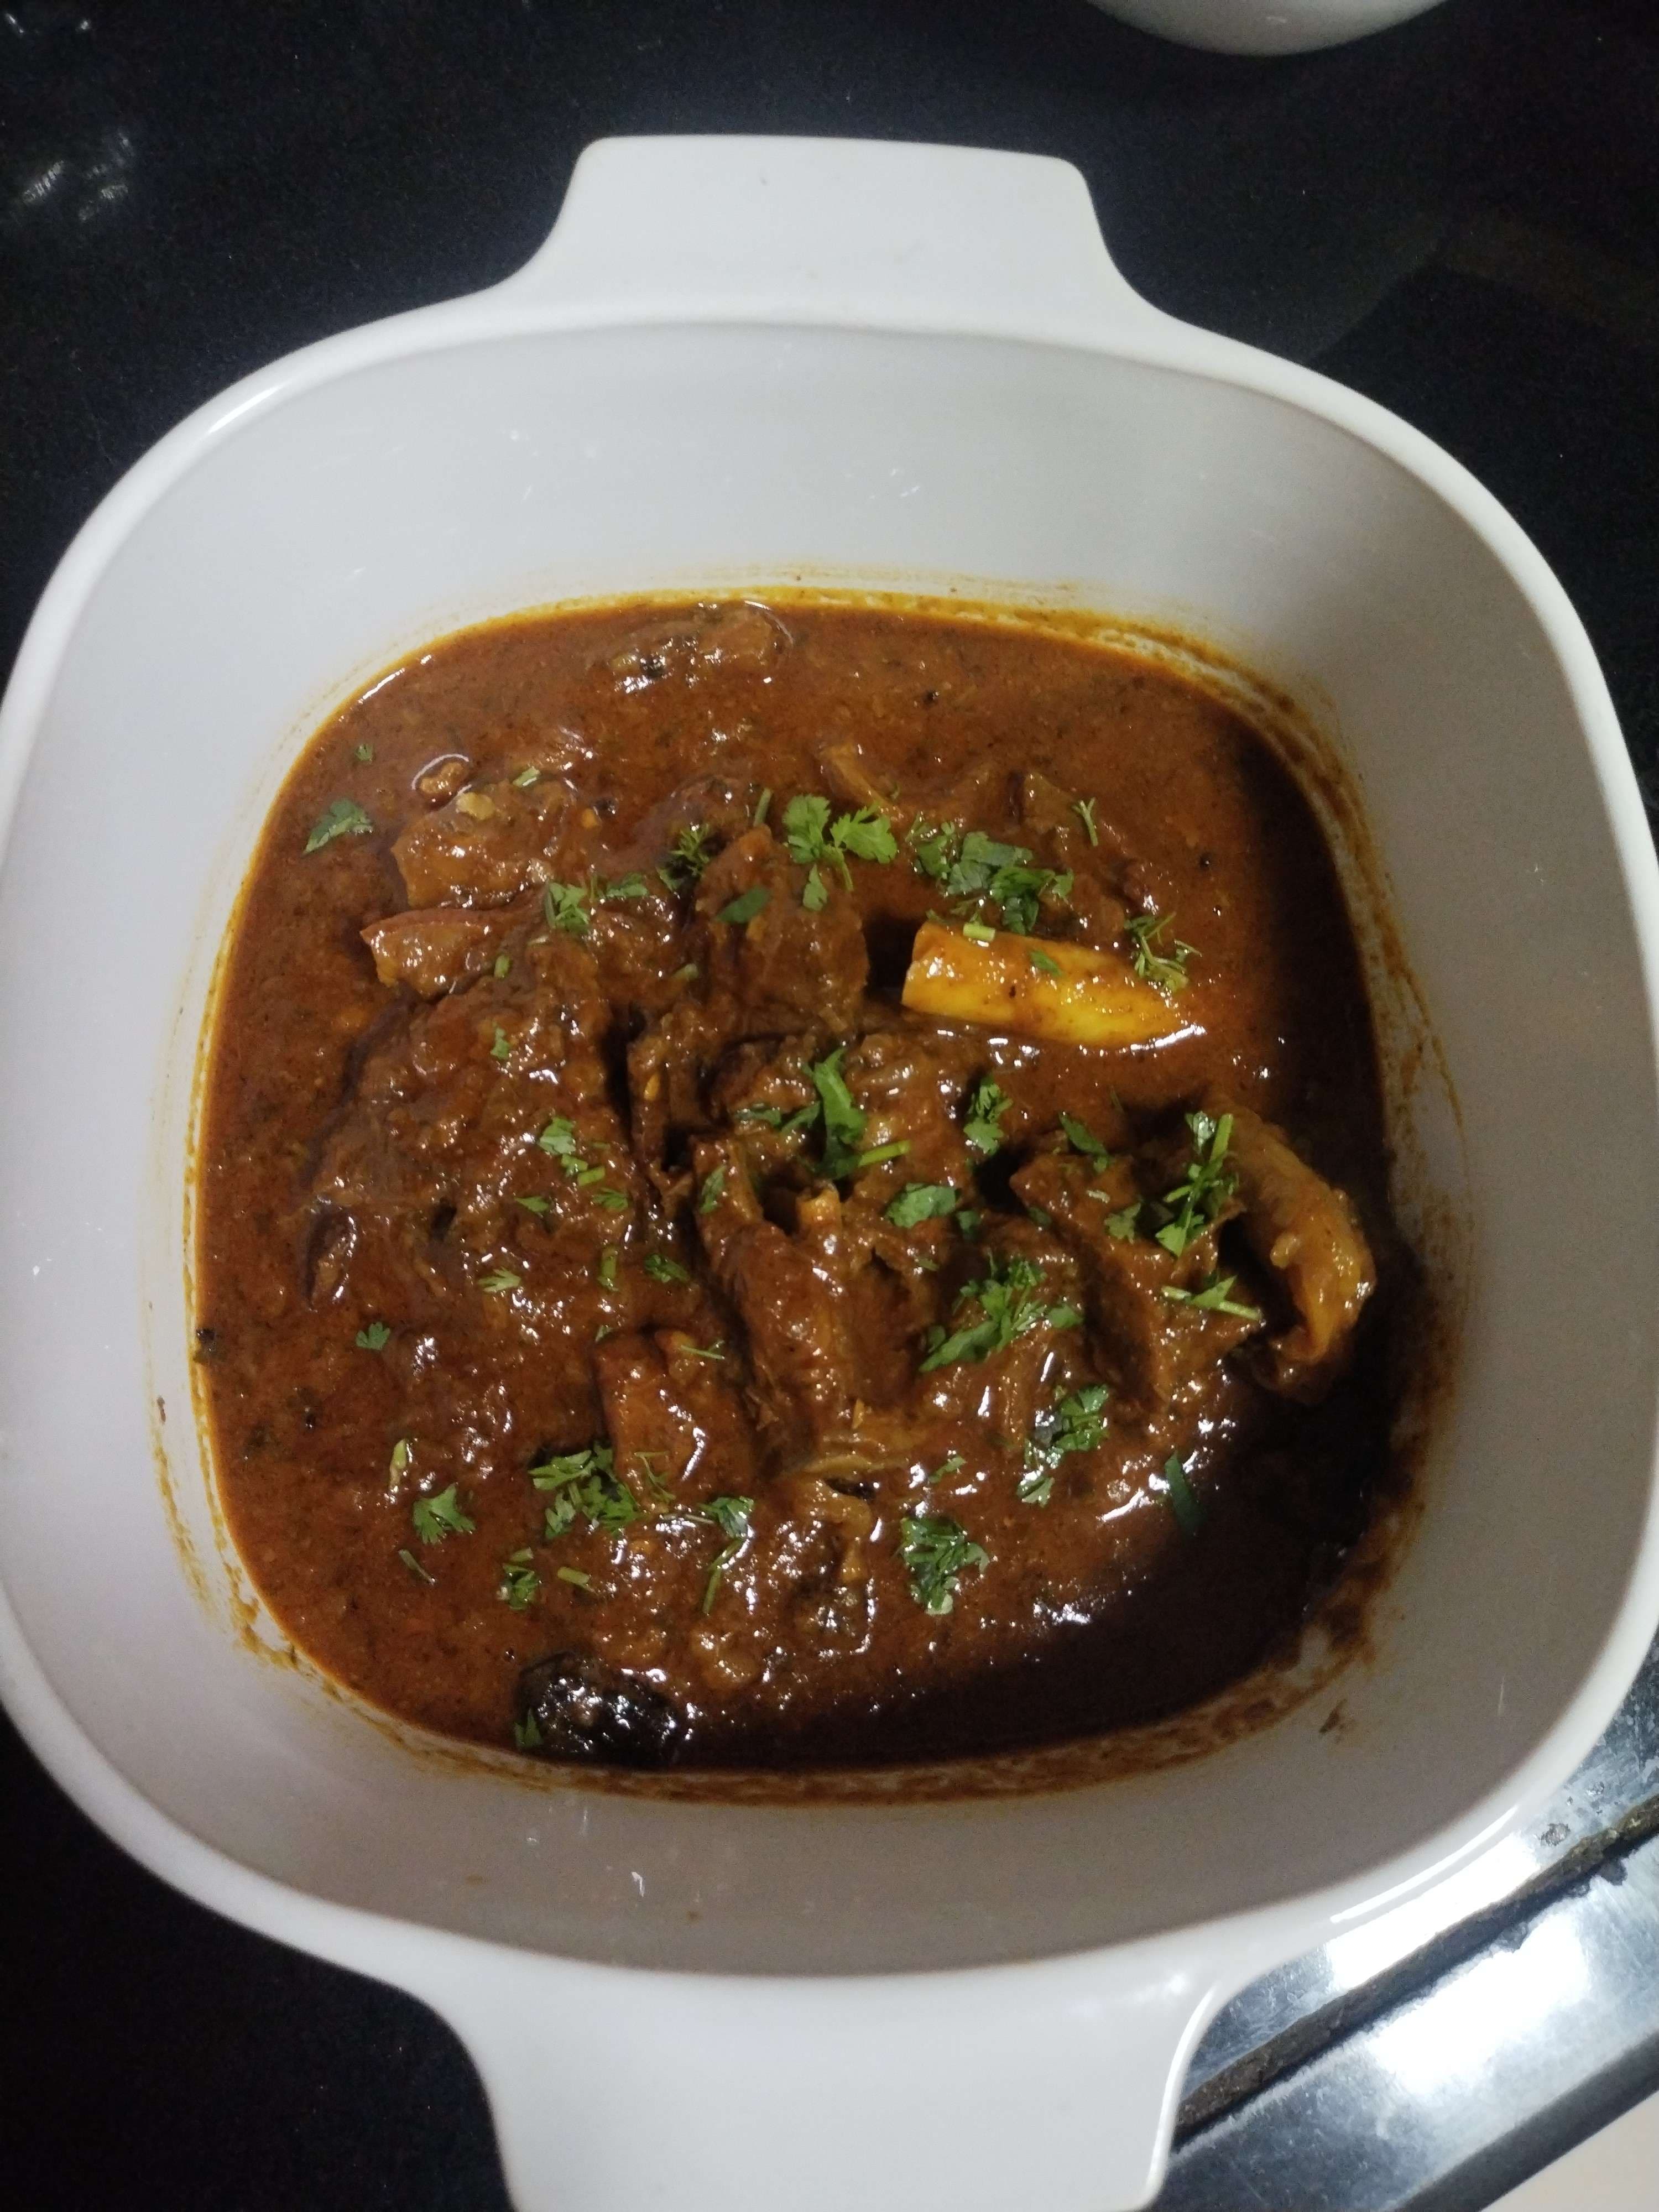 Tasty Mutton Korma cooked by COOX chefs cooks during occasions parties events at home